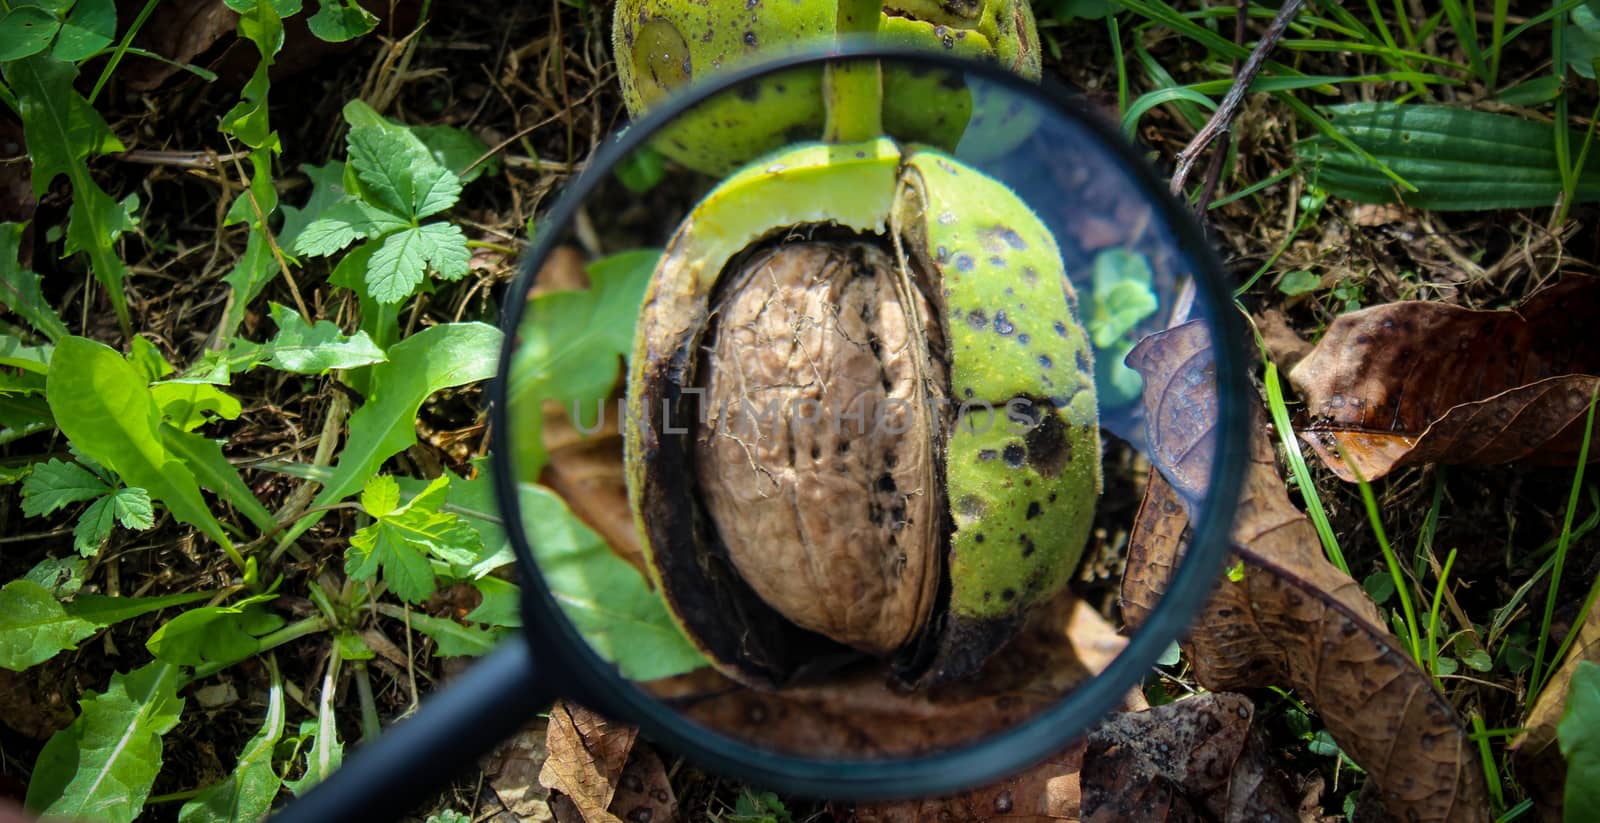 The banner of the walnut fruit inside the cracked green shell of the walnut on the ground are magnified through a magnifying glass. Two walnuts magnified with a magnifying glass. by mahirrov